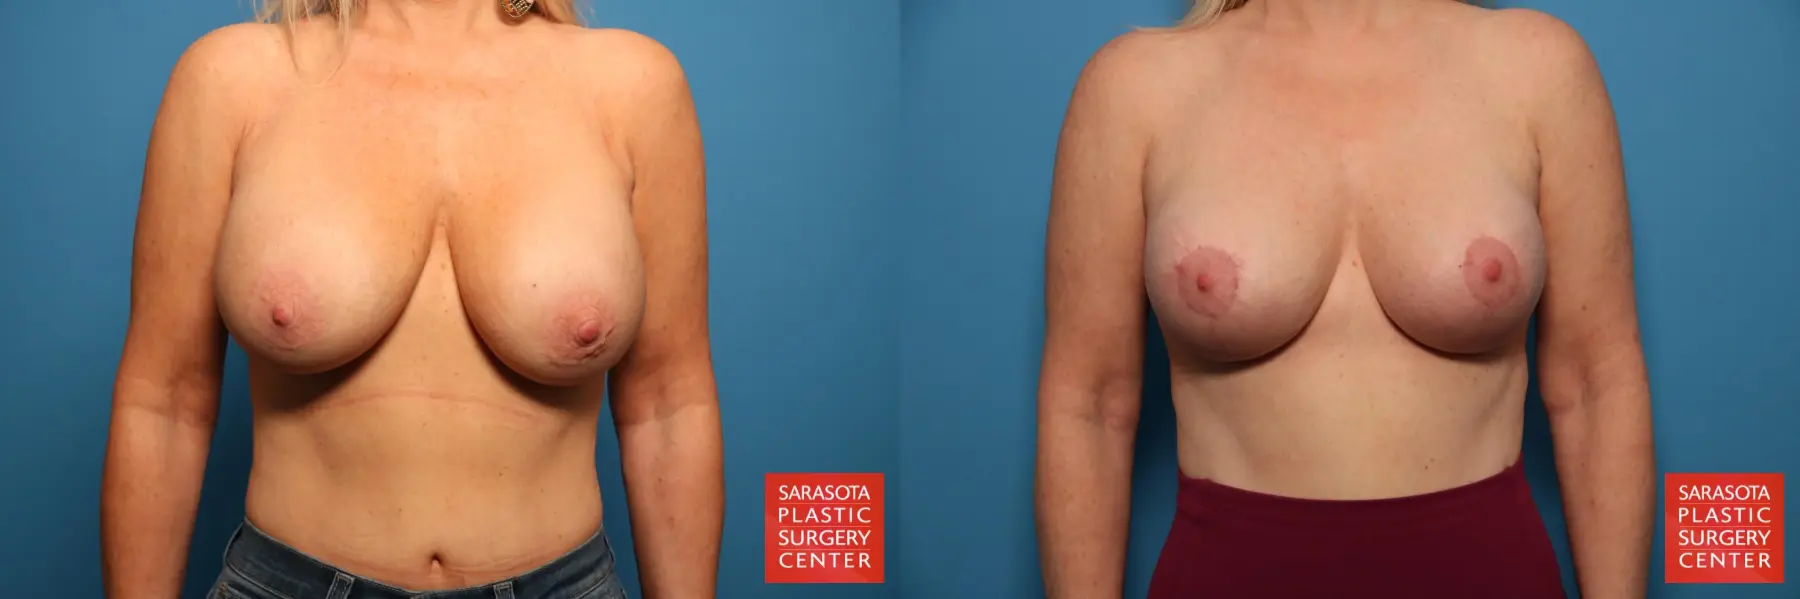 Breast Revision: Patient 1 - Before and After 1